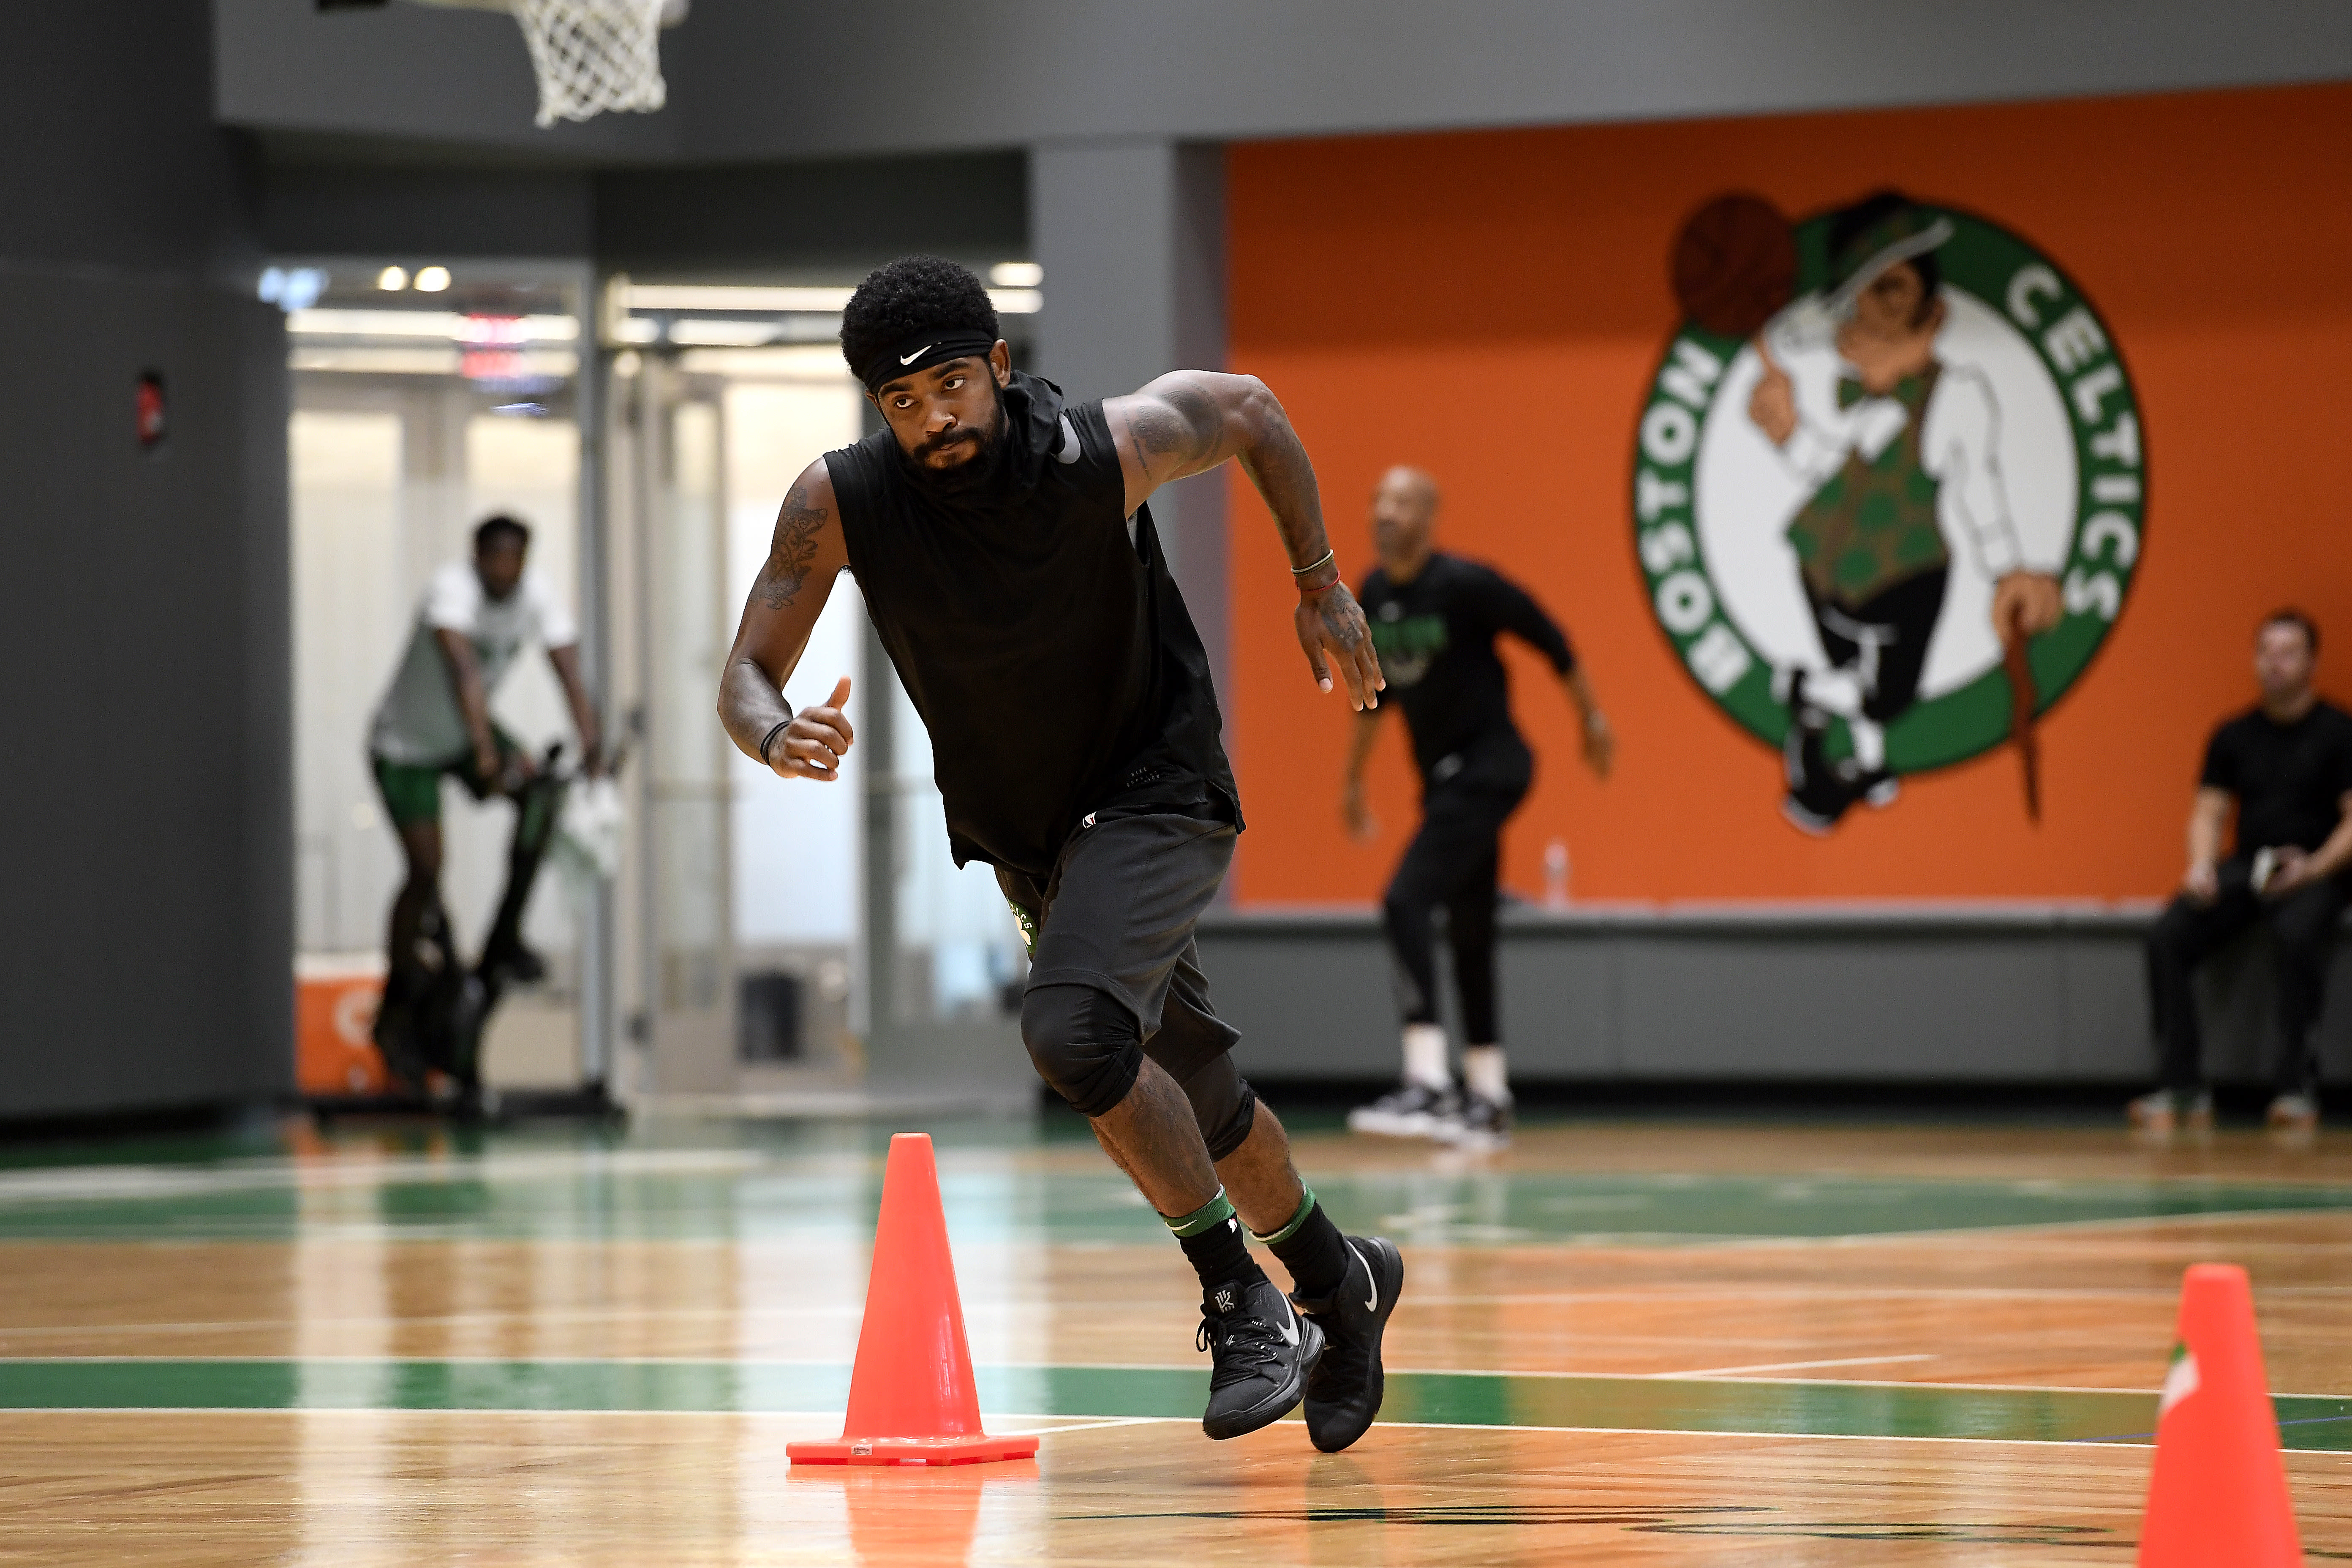 Kyrie Irving in the Nike Kyrie 5